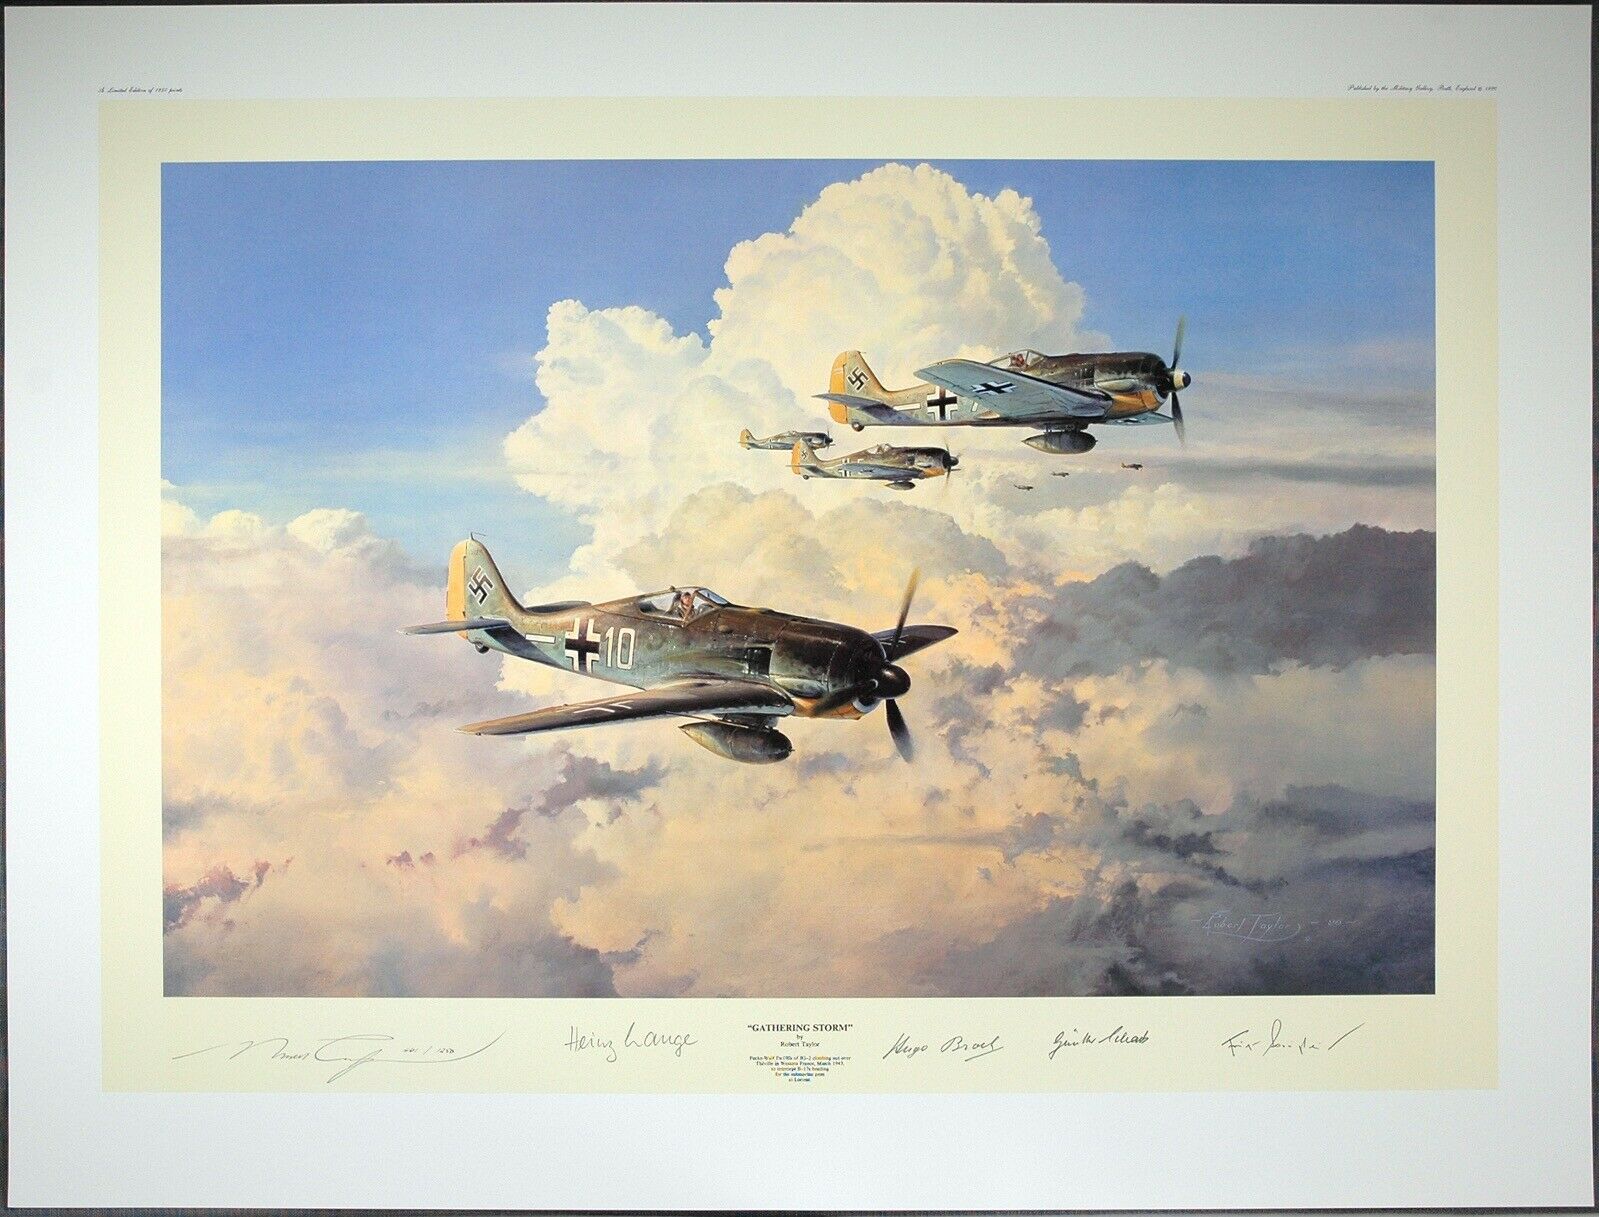 Robert Taylor Gathering Storm Le Art—signed By 4 Luftwaffe Knight’s Cross Pilots